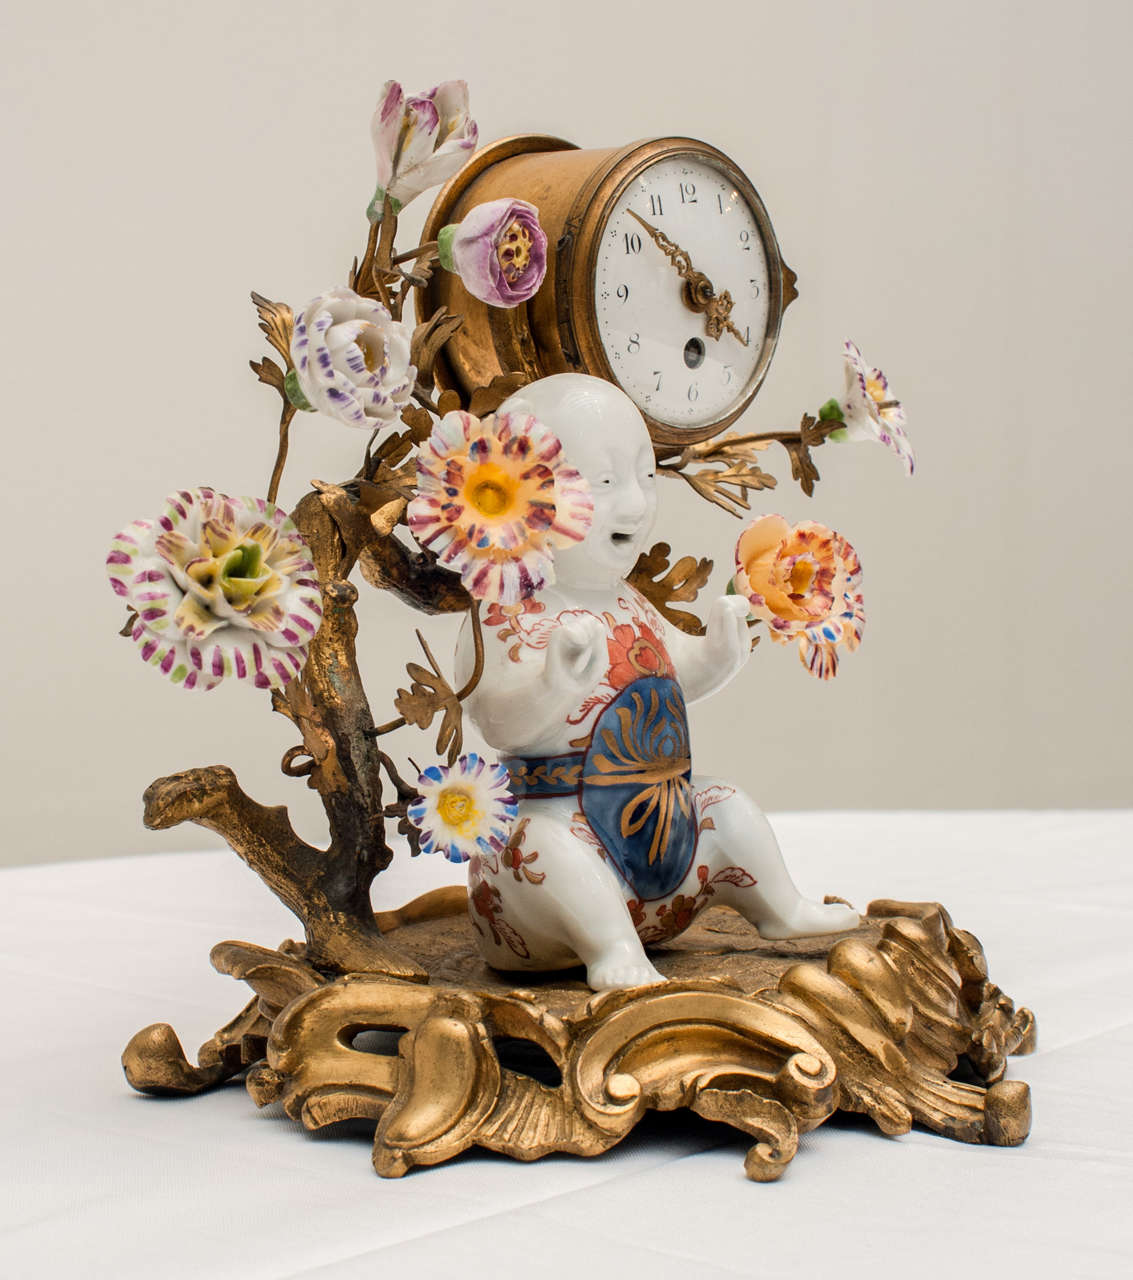 A small Chinese porcelain and gilt bronze clock. It features a nice decoration in the spirit of rococo with foliate scrolls. The gilded branches and sheet metal leaves are decorated with multi colored porcelain flowers surrounding a young child<br